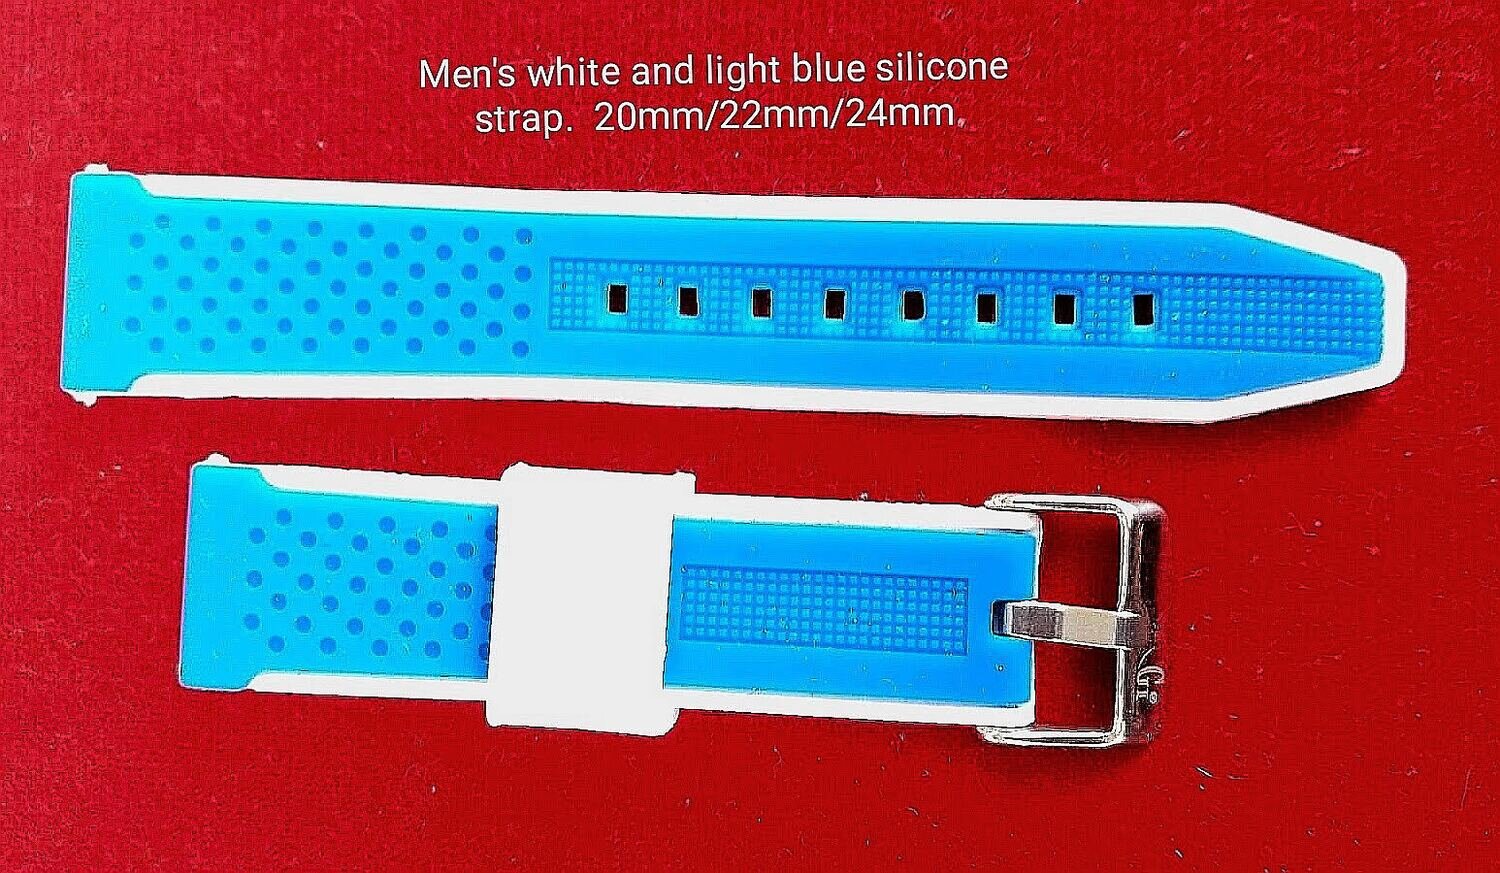 Men's white and light blue silicone strap 20mm/22mm/24mm